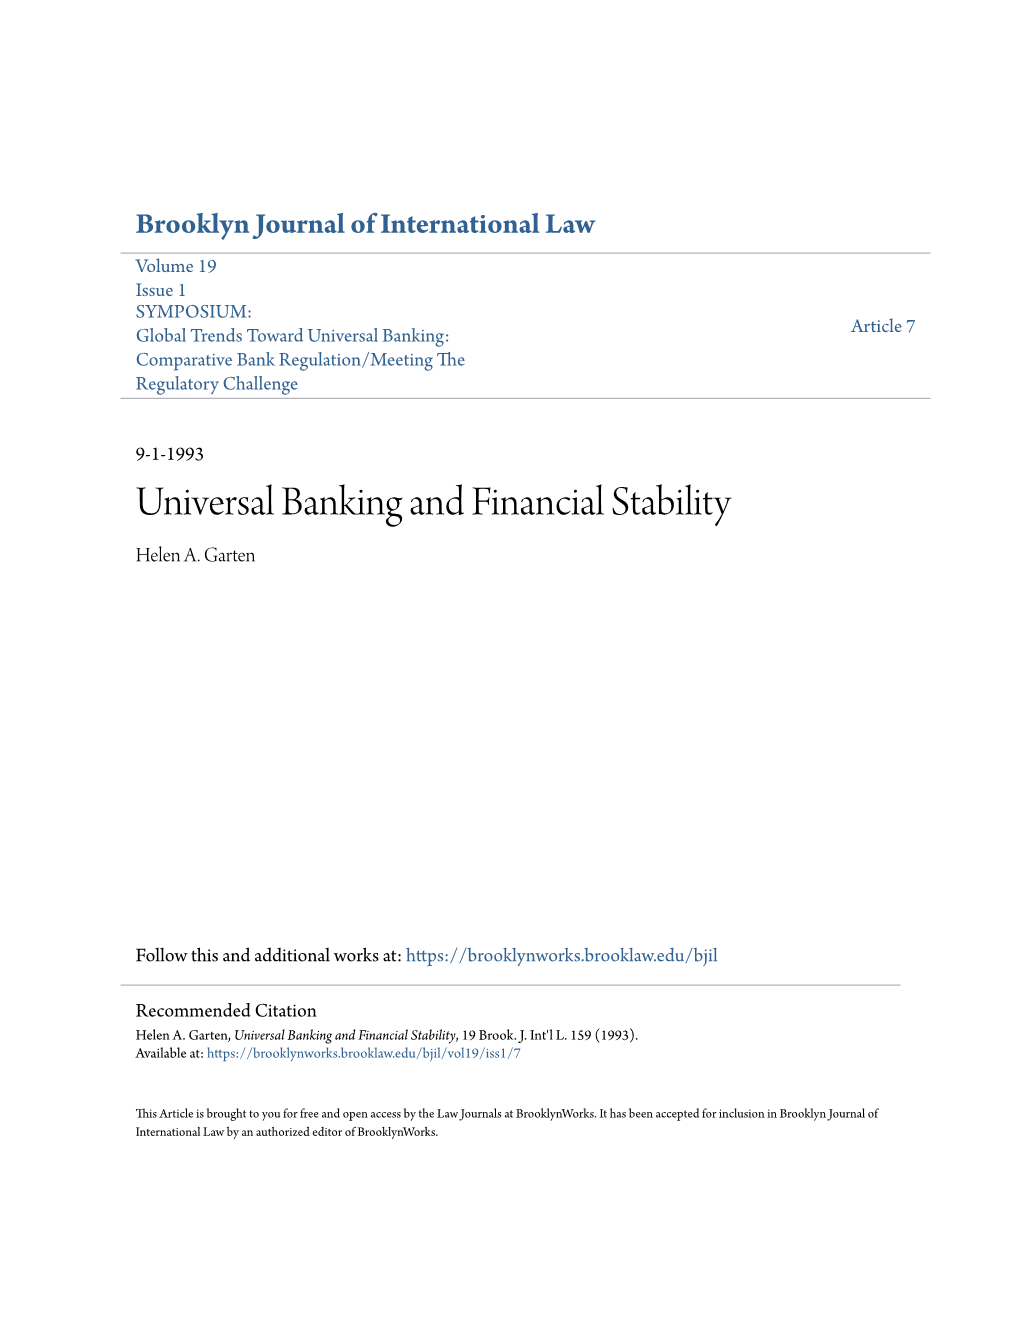 Universal Banking and Financial Stability Helen A